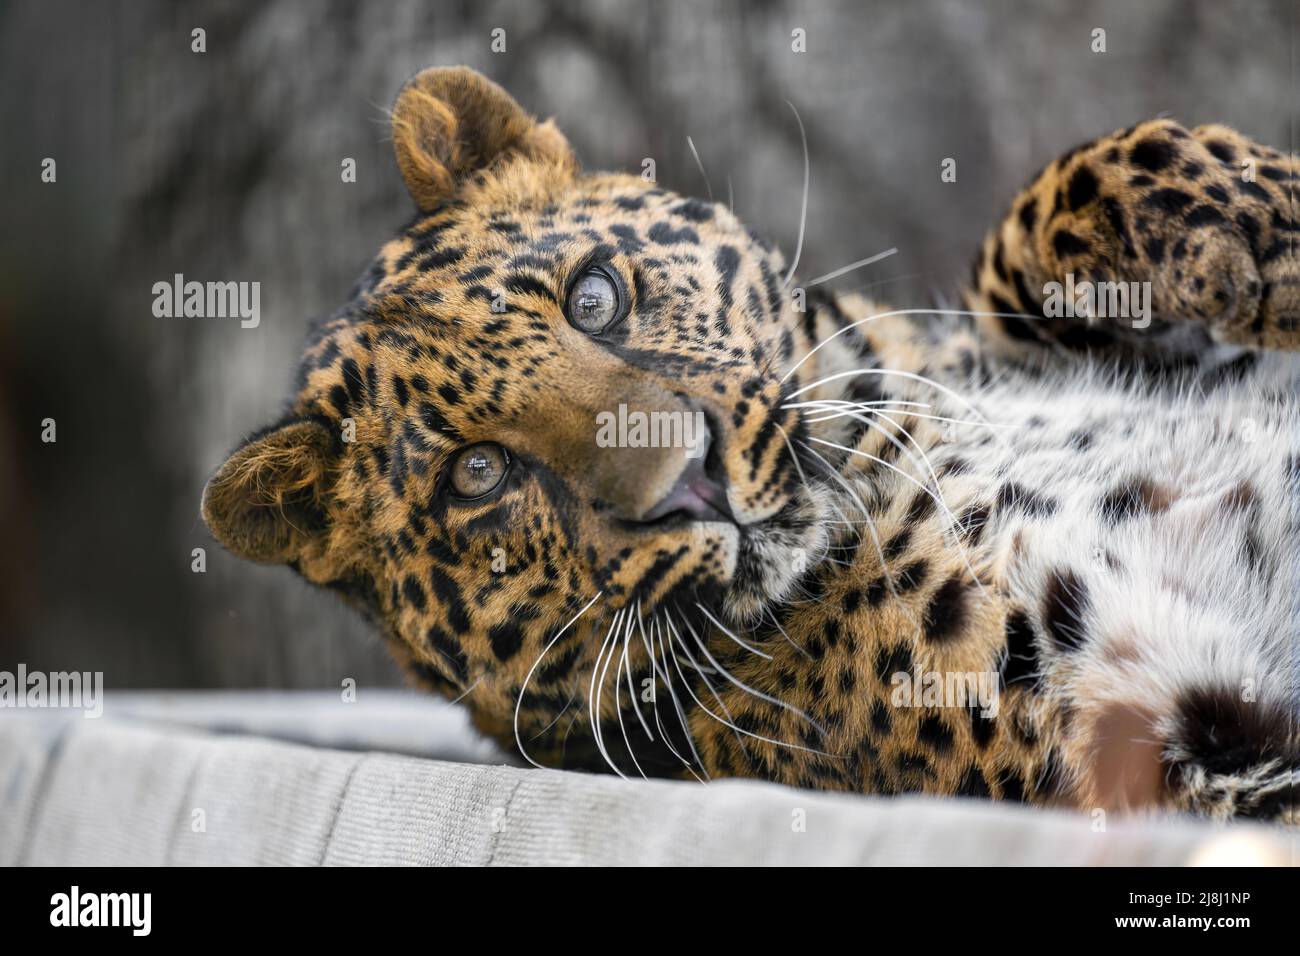 A spotted leopard cub lies and observes the surroundings. Stock Photo